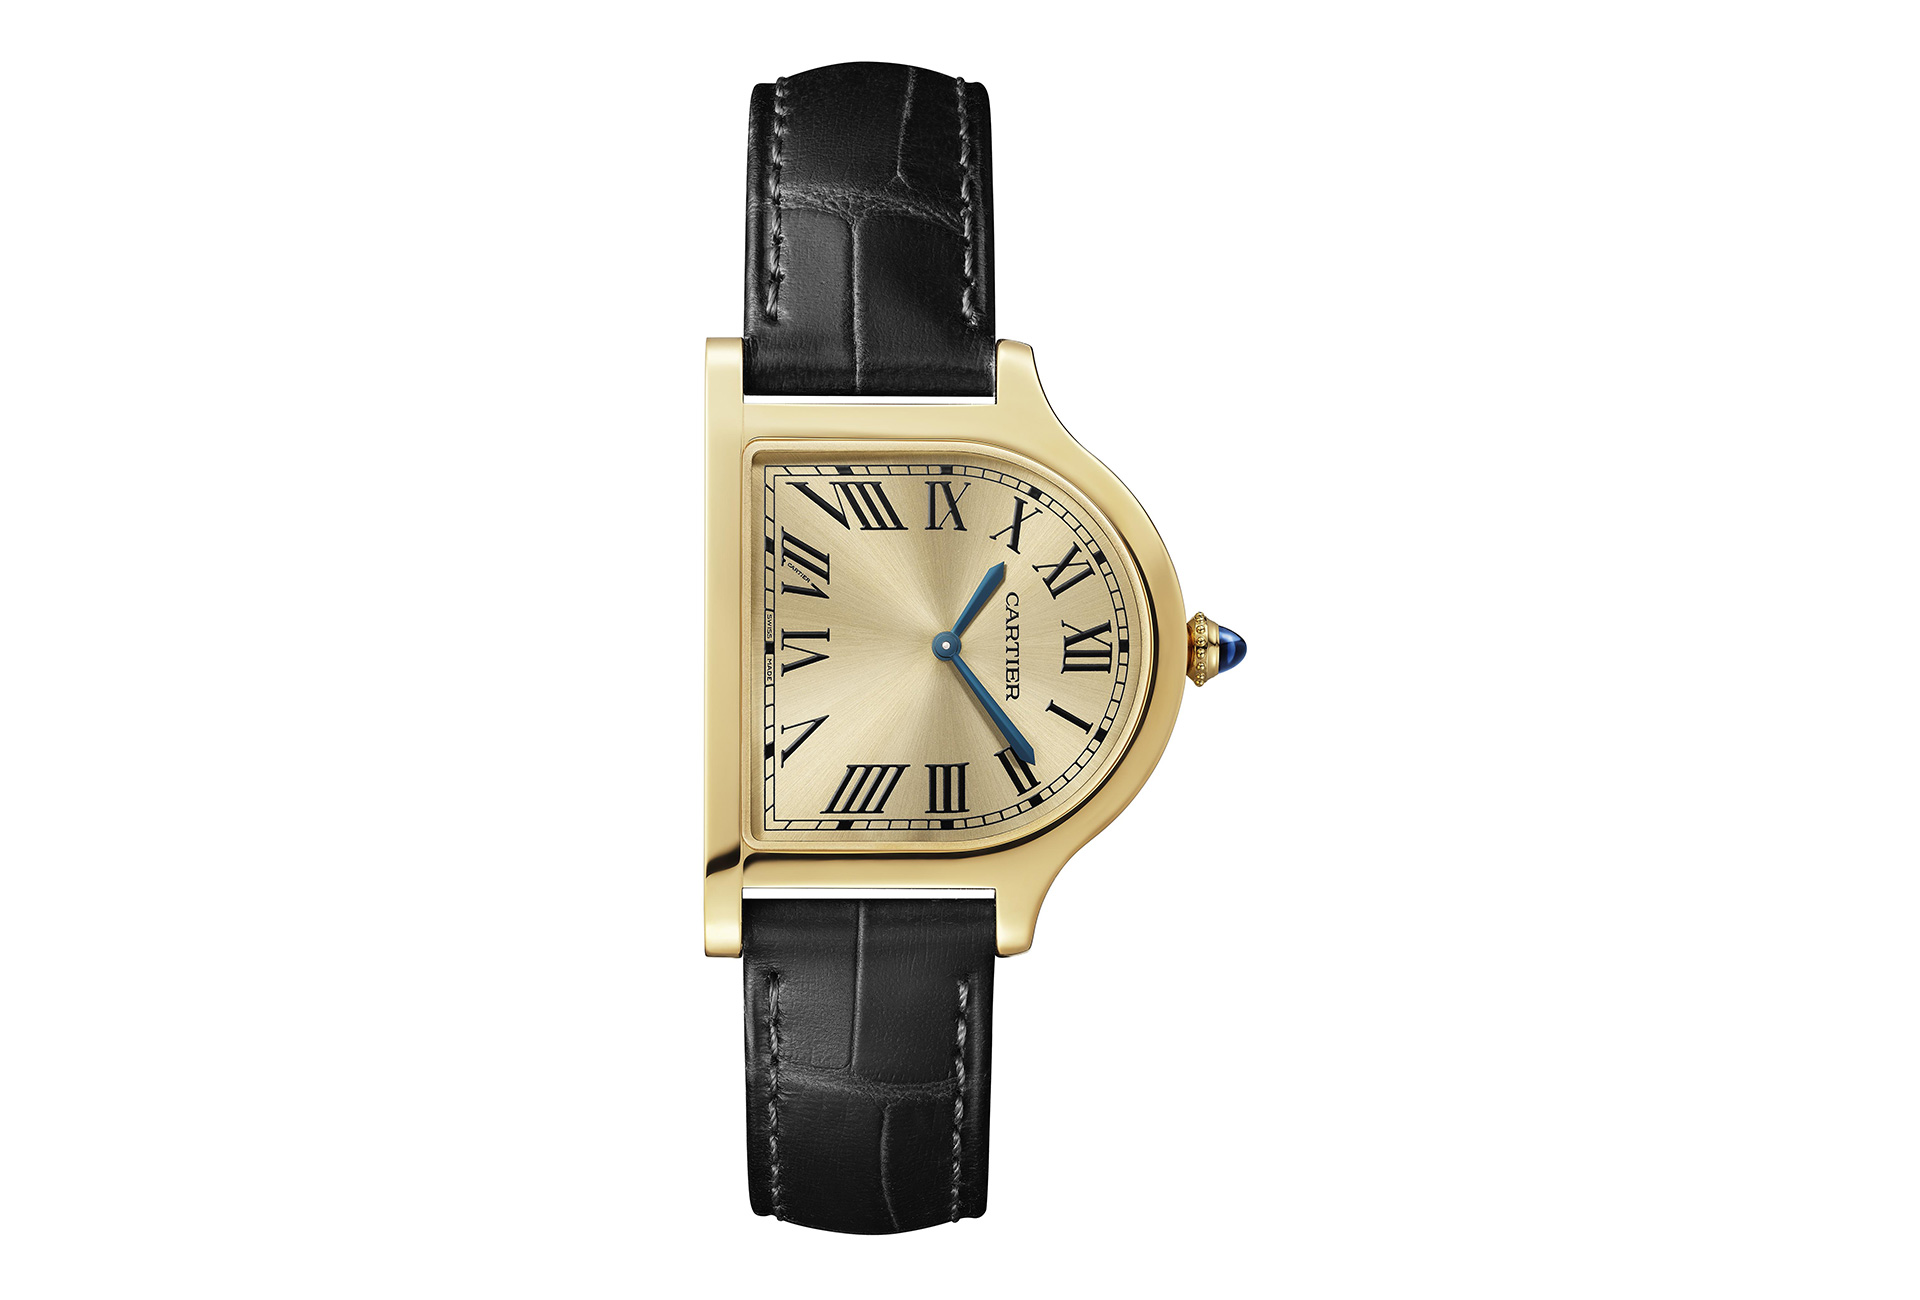 The return of the century-old Cloche de Cartier – FHH Journal